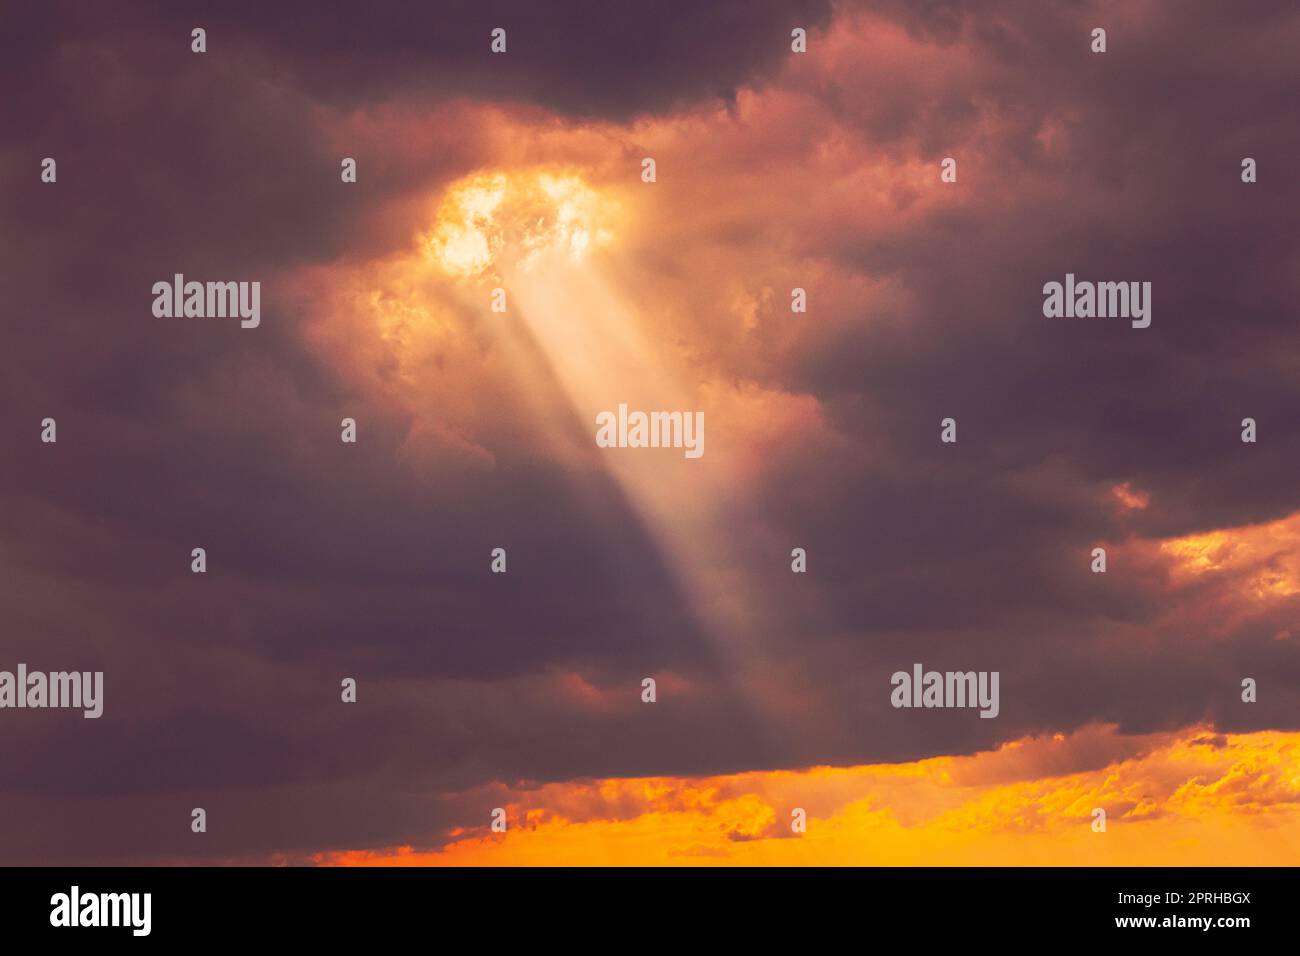 Sunshine In Sunrise Bright Dramatic Sky. Sun Ray Through Dark Rainy Clouds. Scenic Colorful Sky At Dawn. Sunset Sky Natural Abstract Background Stock Photo